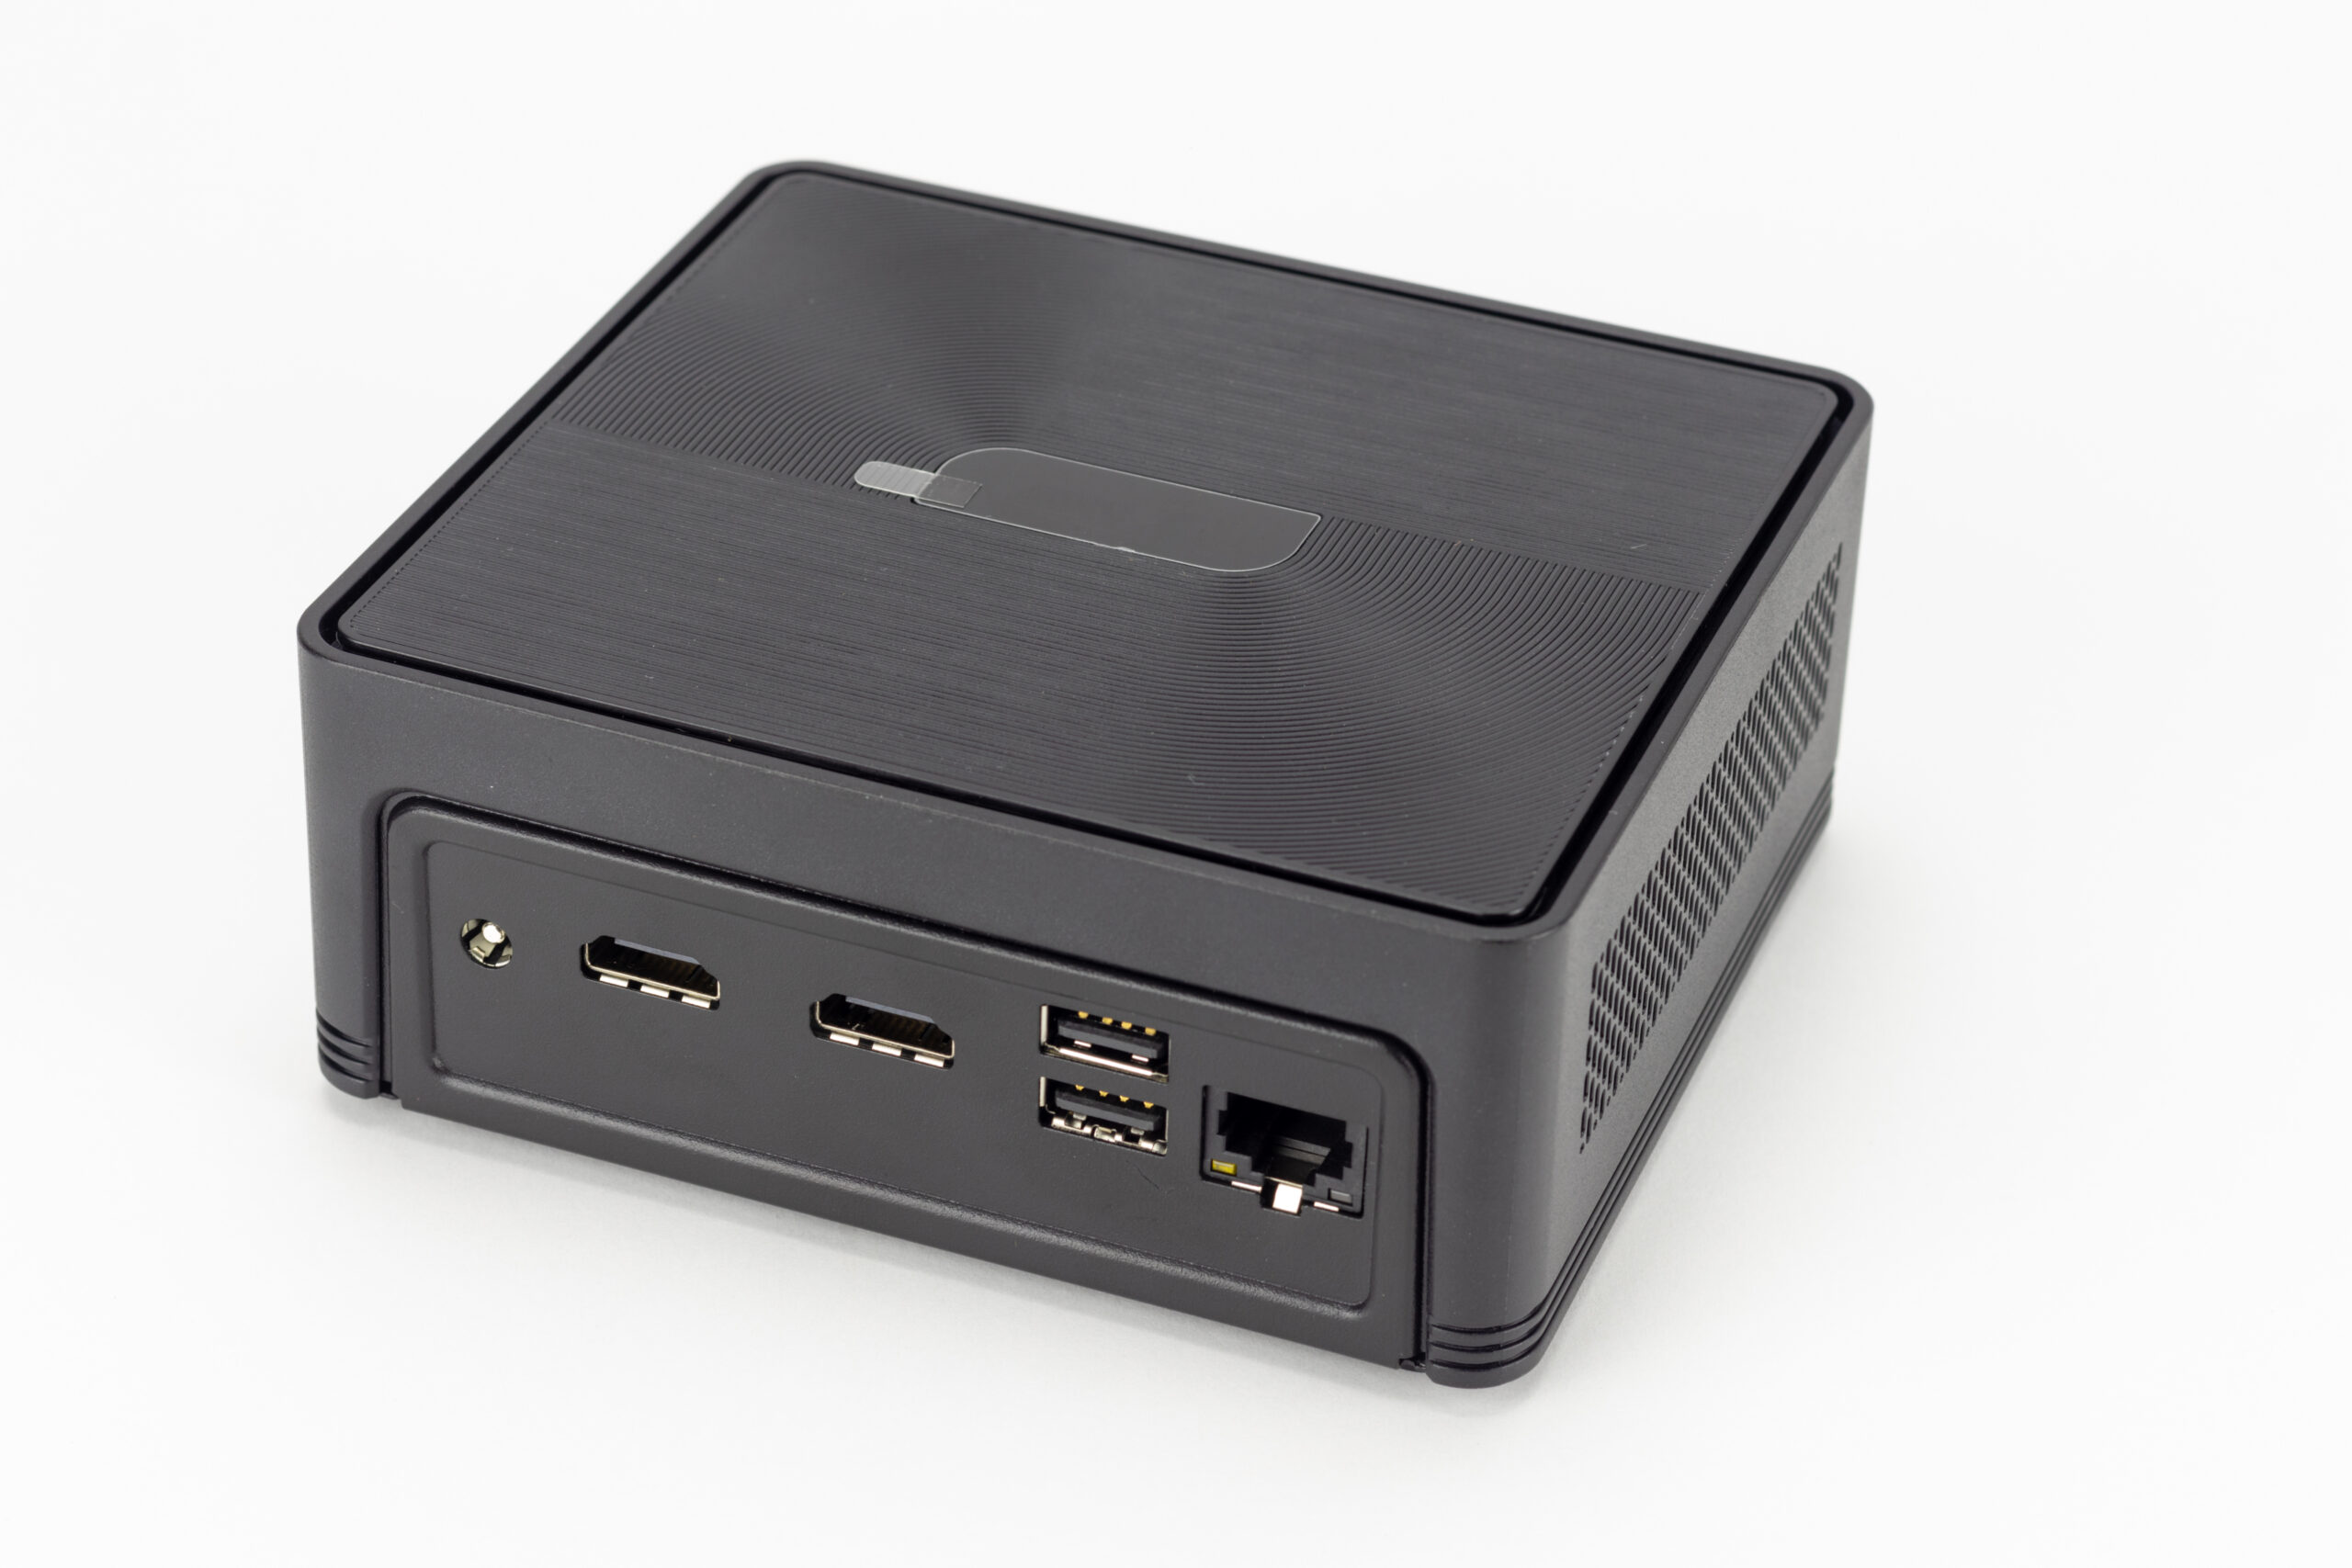 Geek Insider, GeekInsider, GeekInsider.com,, 10 Things About Mini PCs You Should Consider Before Buying, Windows